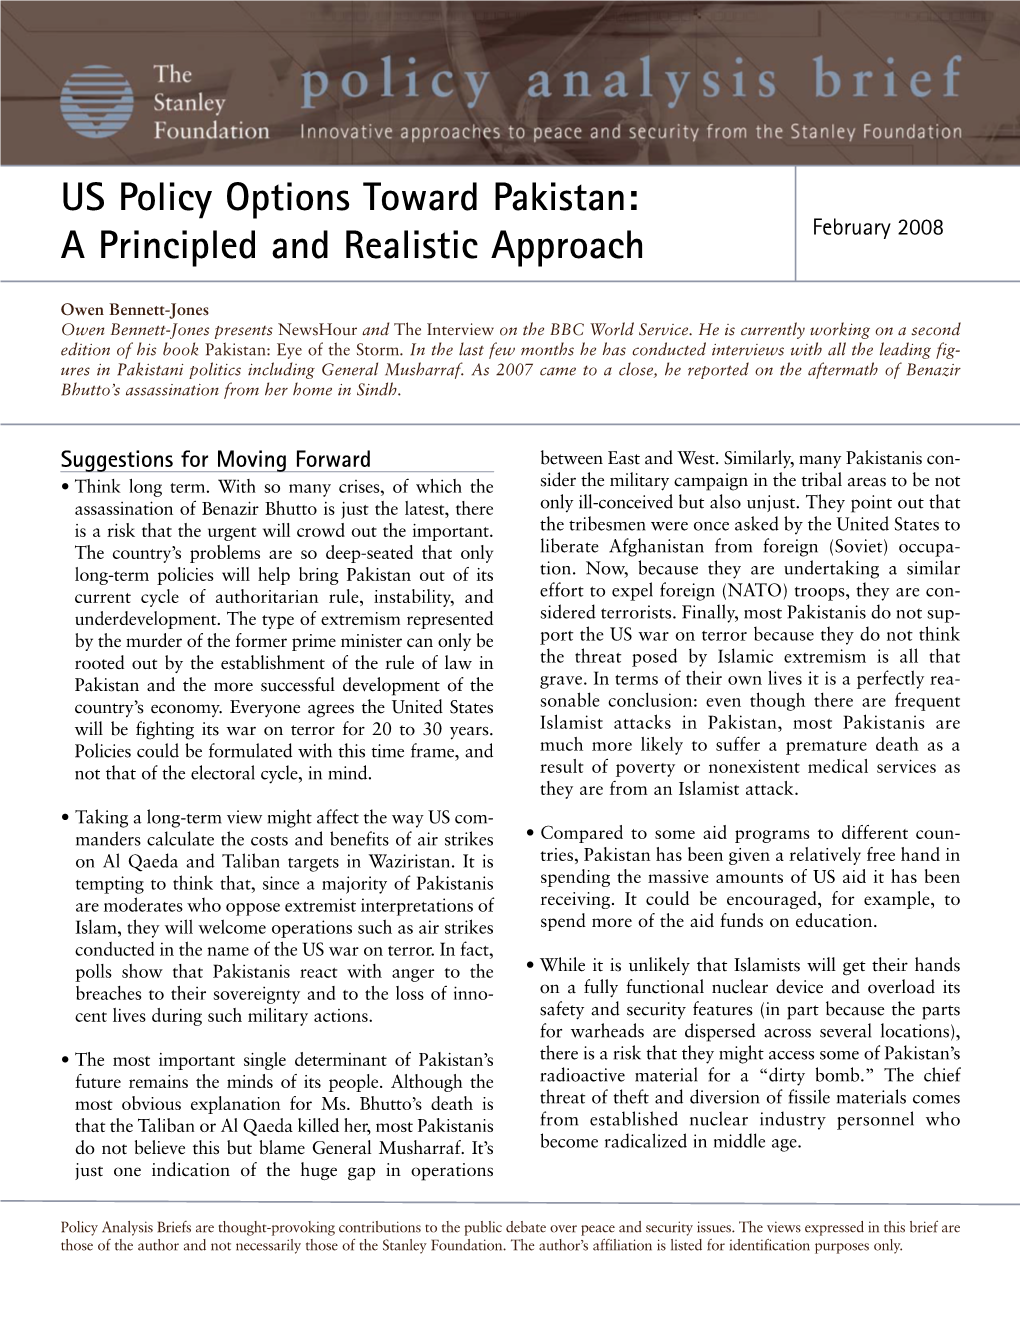 US Policy Options Toward Pakistan: a Principled and Realistic Approach February 2008